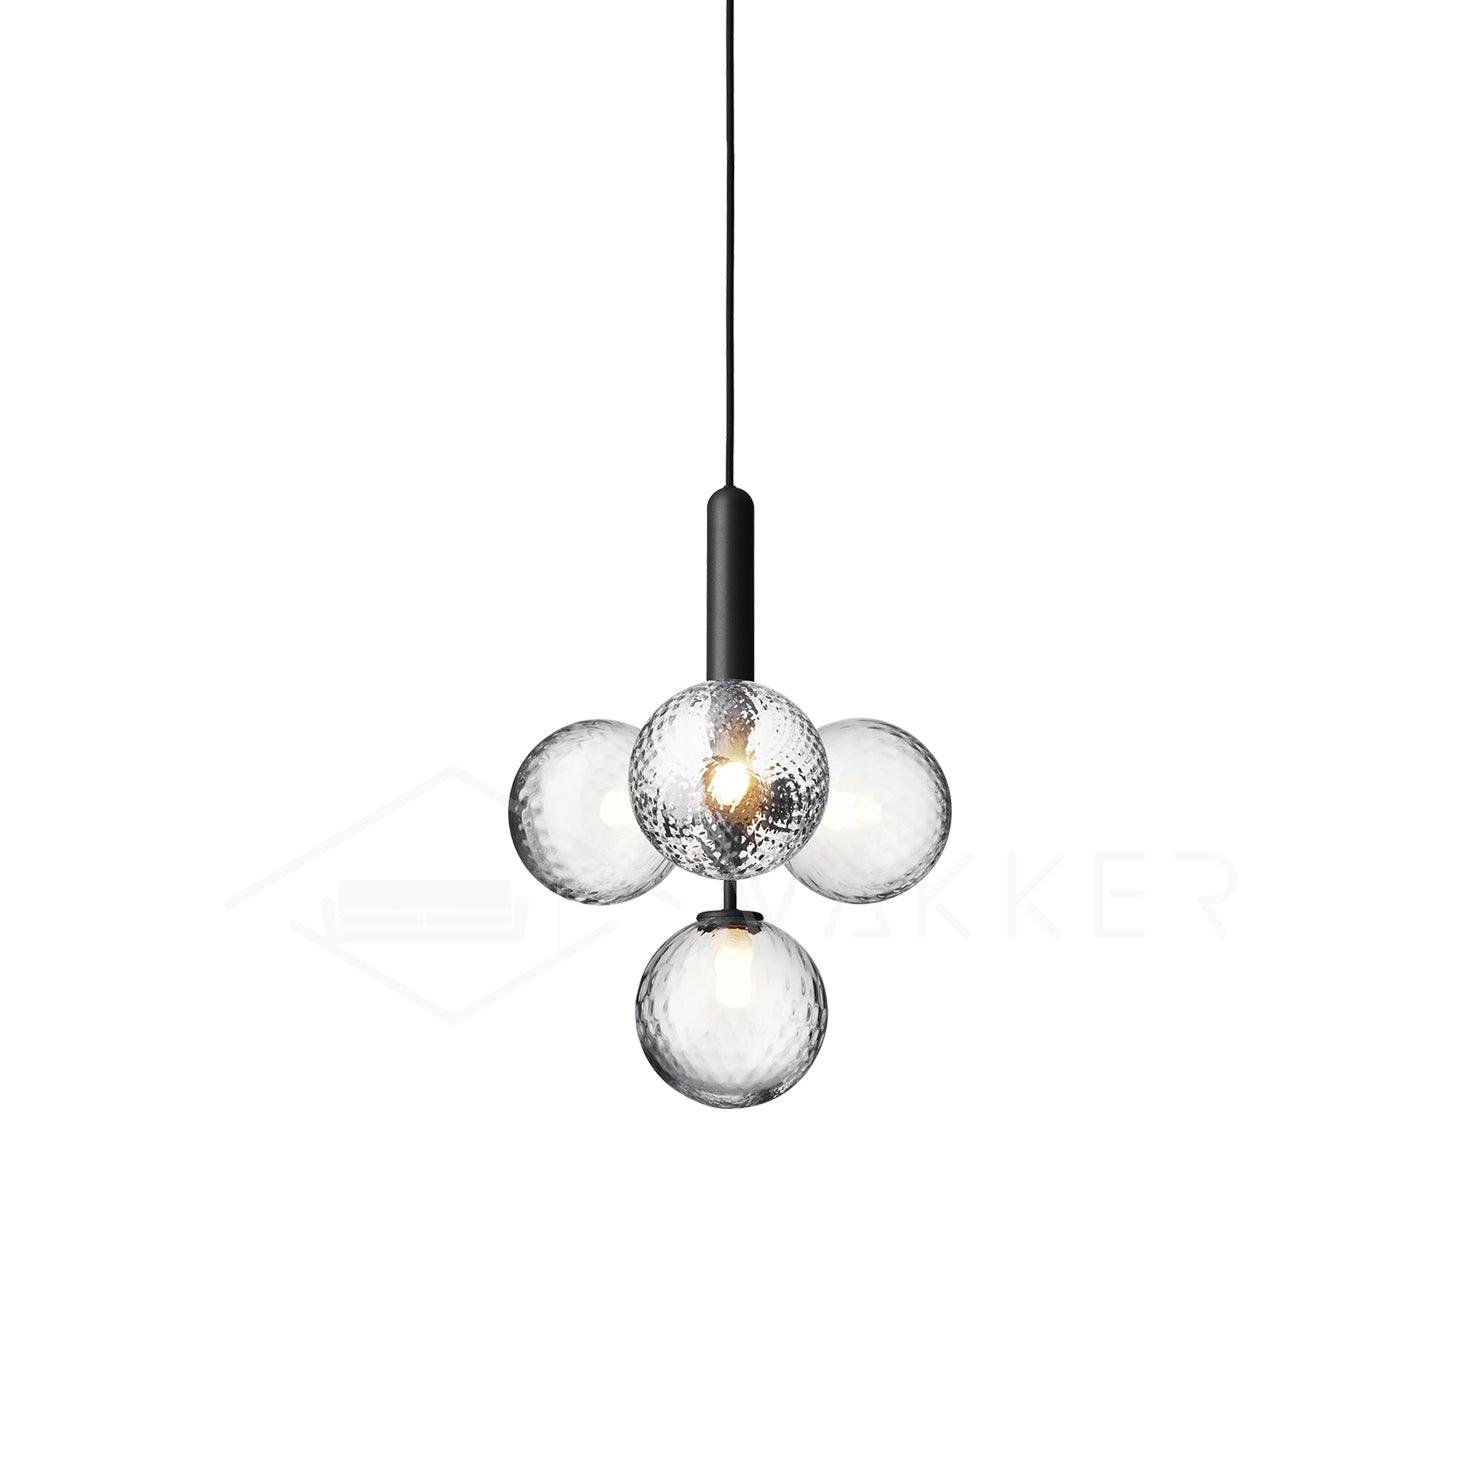 Black Miira Pendant Light with 4 Heads, Diameter 13.8 inches x Height 17 inches (35cm x 43cm), Clear Glass